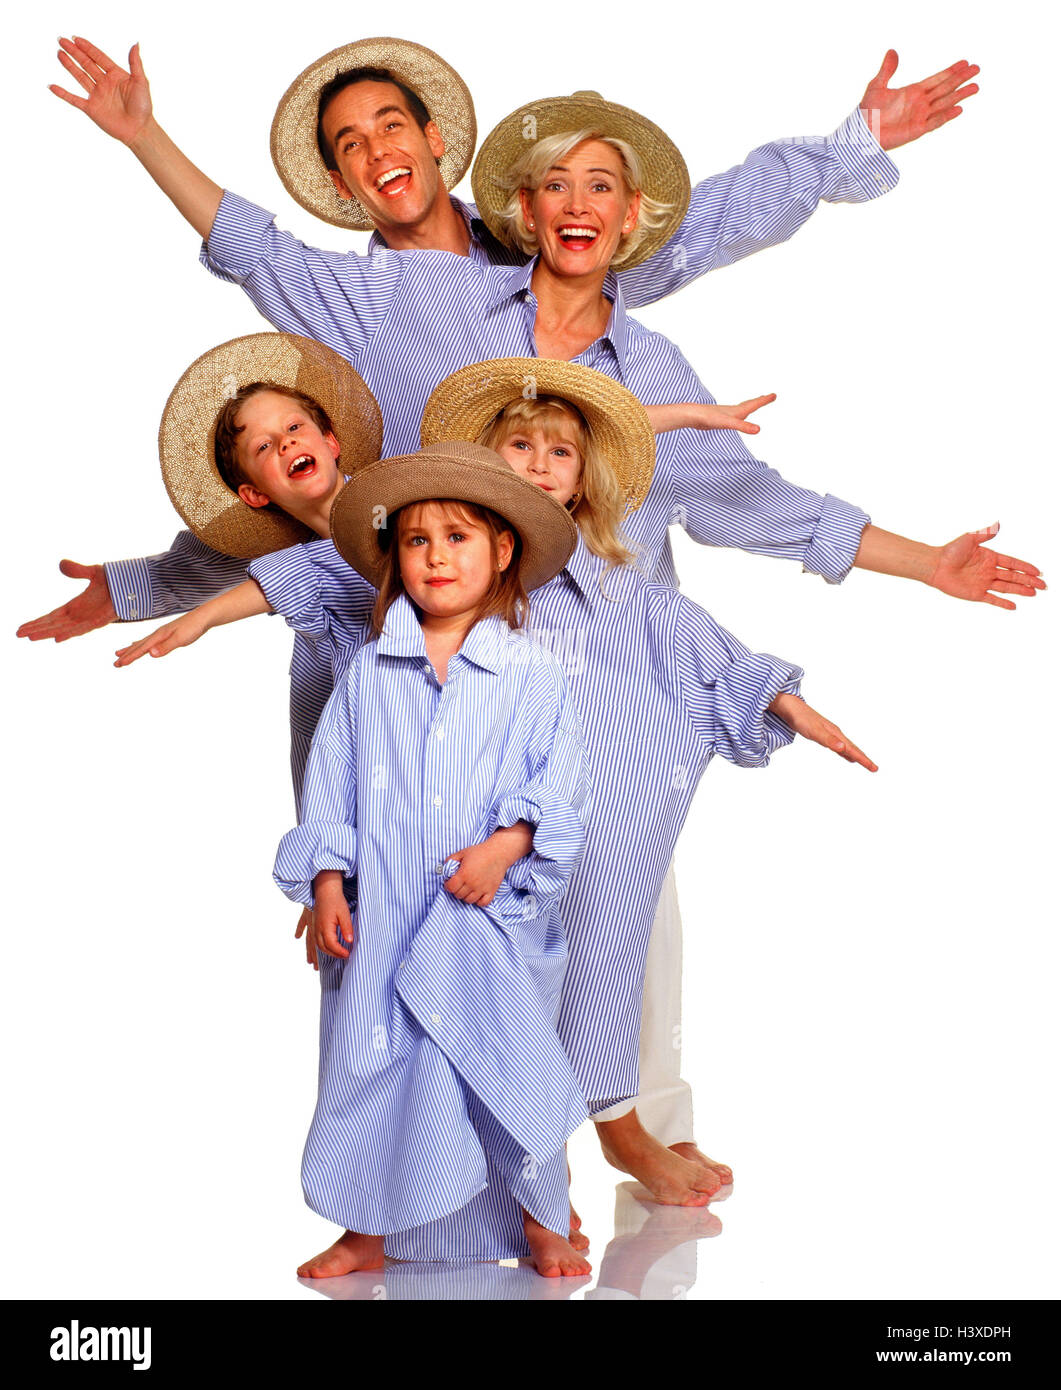 Family, clothes, 'partner's look', straw hats, shirts, white-blue, touched, gesture, group picture Families, man, woman, parents, children, boy, son, gesture, pollex, high, girls, subsidiary, subsidiaries, two, unit clothes, care, hats, shirt, shirts, films, stand, laugh, hands, side view, presentation, studio, cut out, Stock Photo